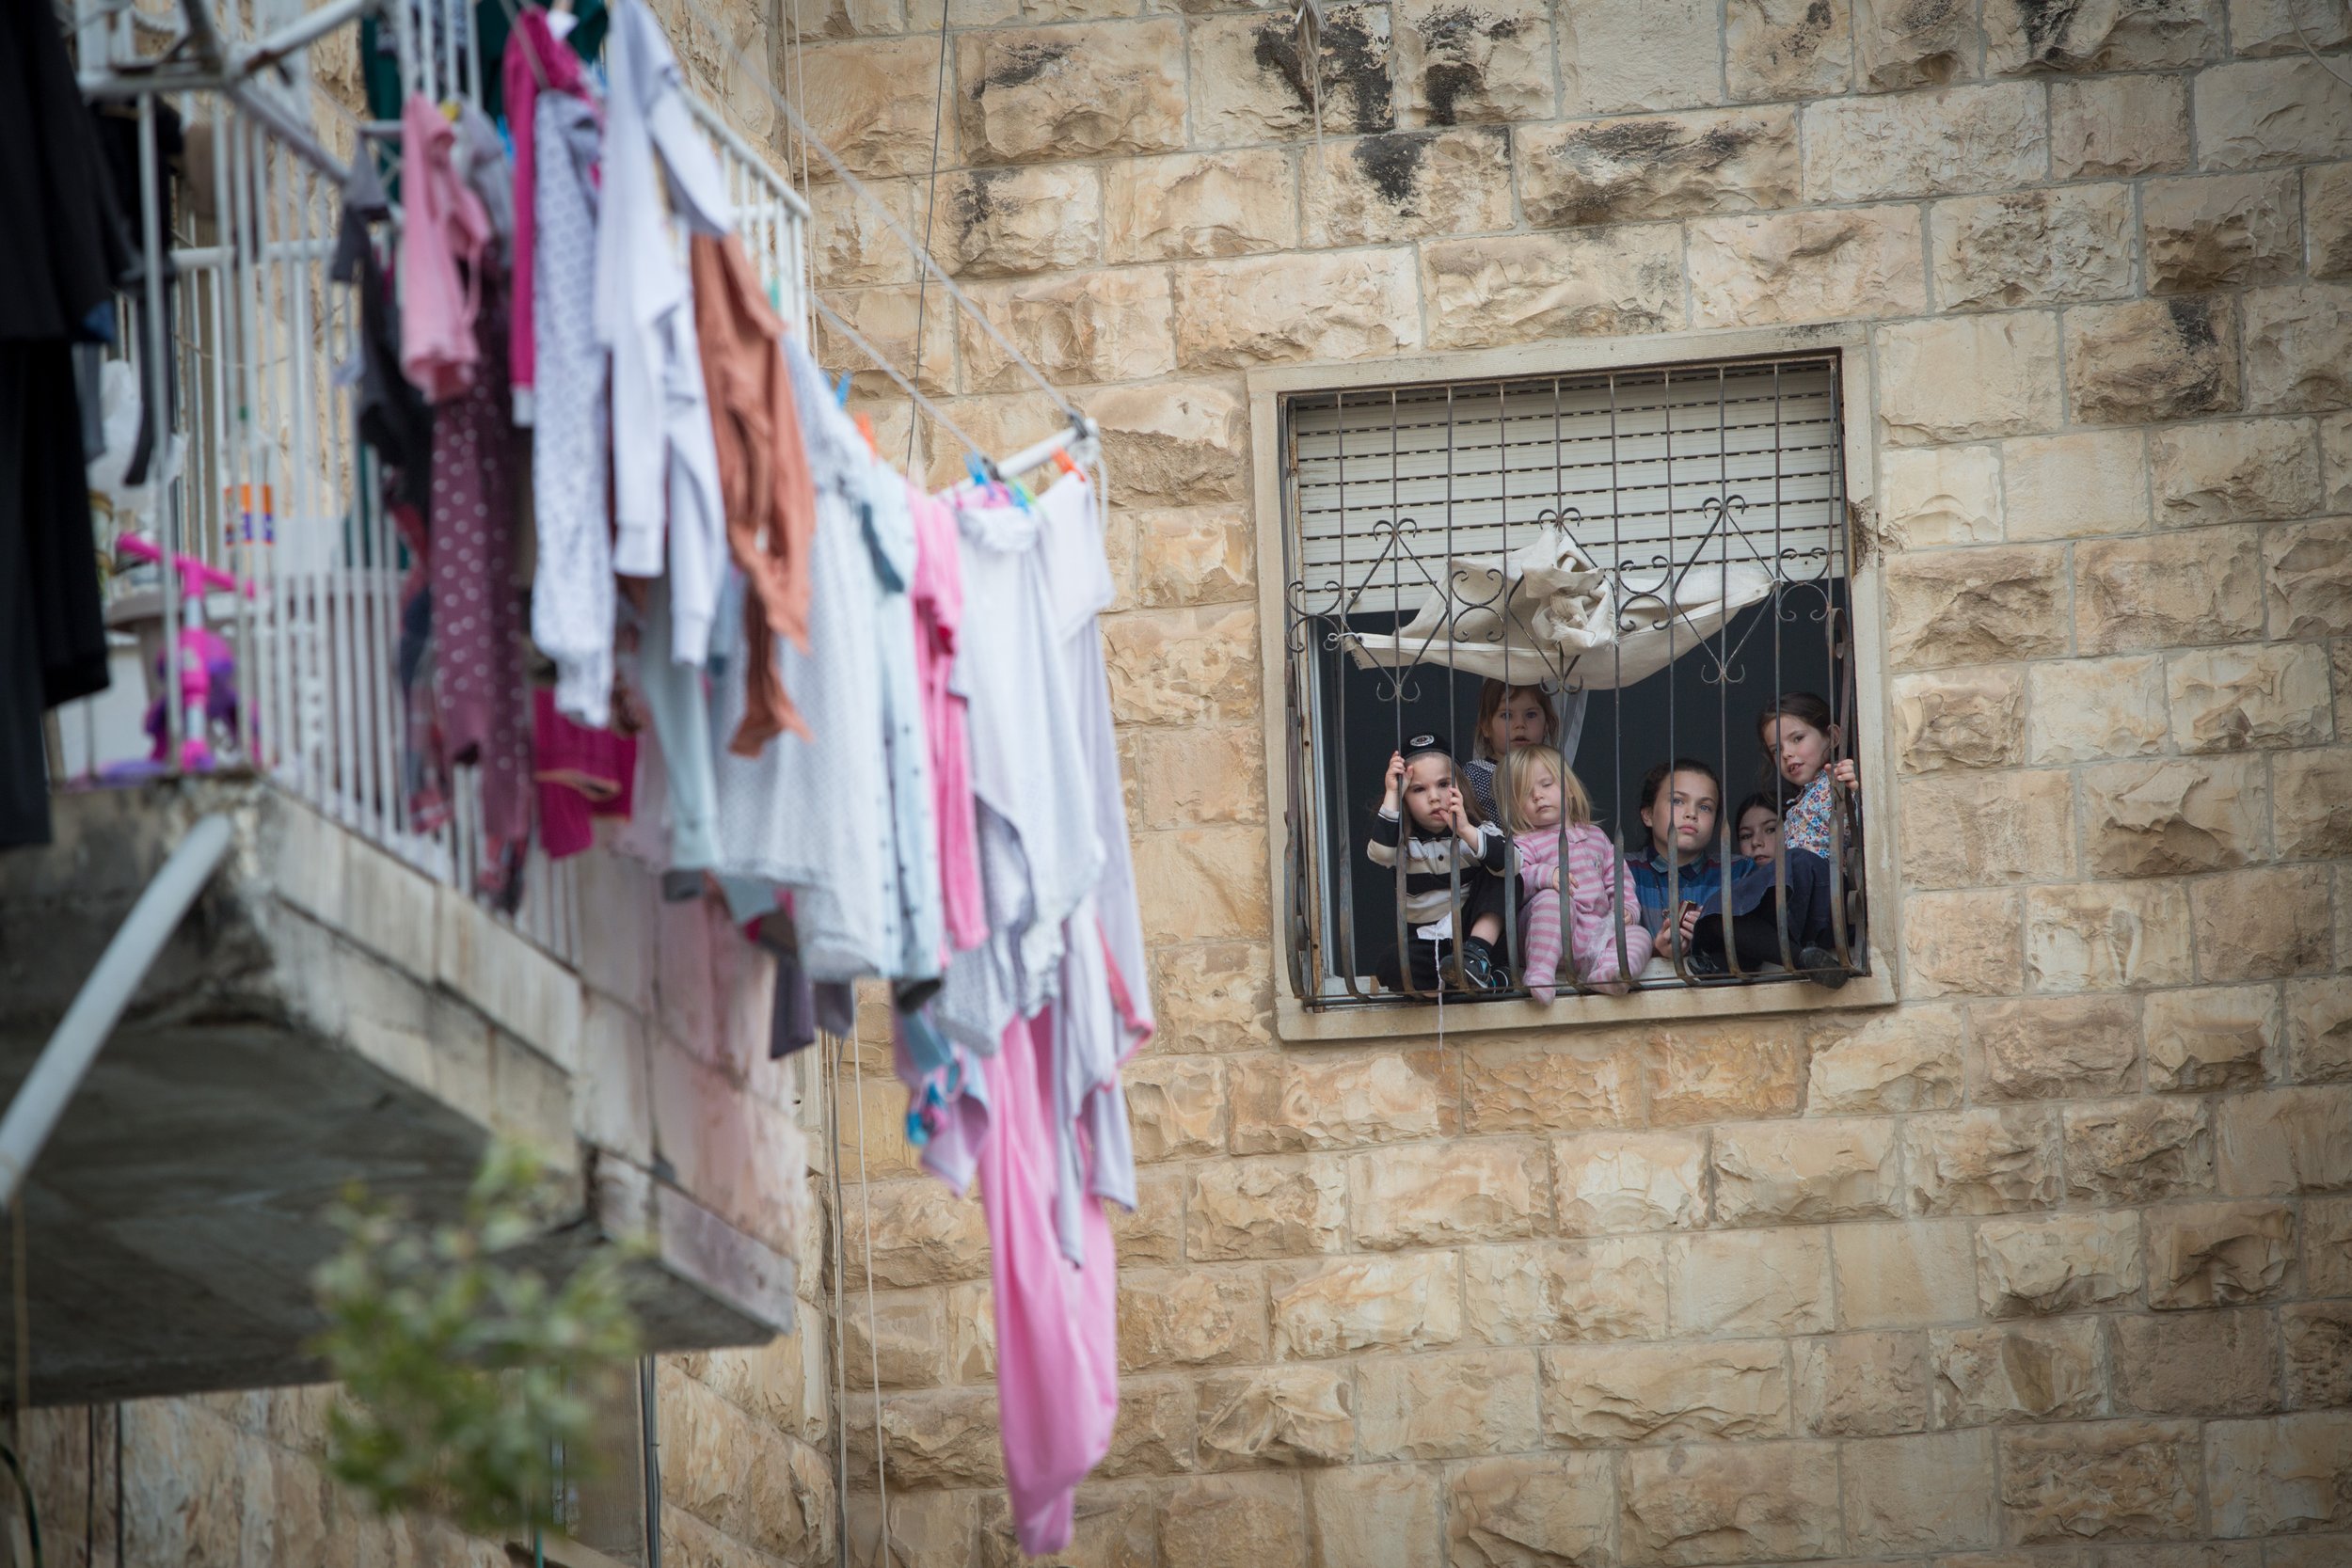  An Ultra orthodox Family looking out the window at Makor Baruch neighborhood in Jerusalem on October 18, 2018. 